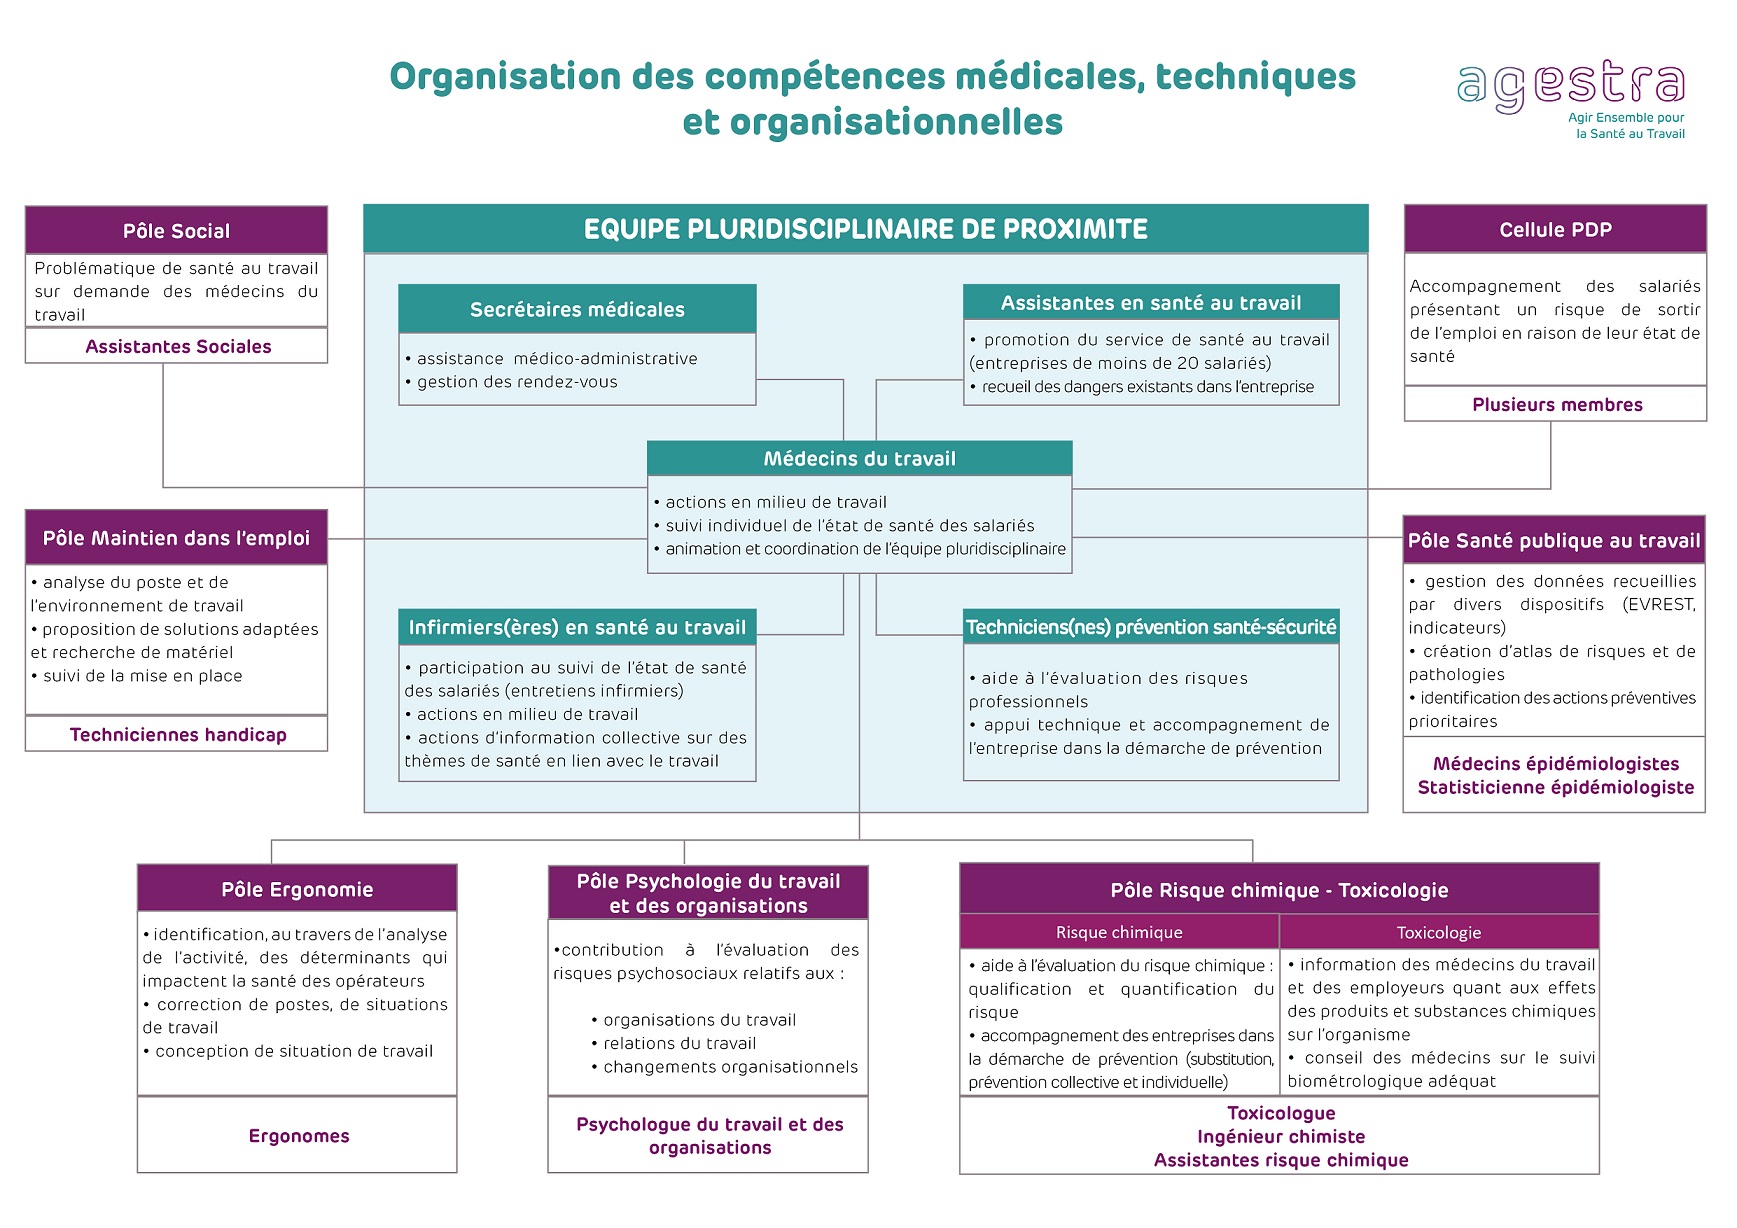 organisation-agestra-comptences-medicales-techniques